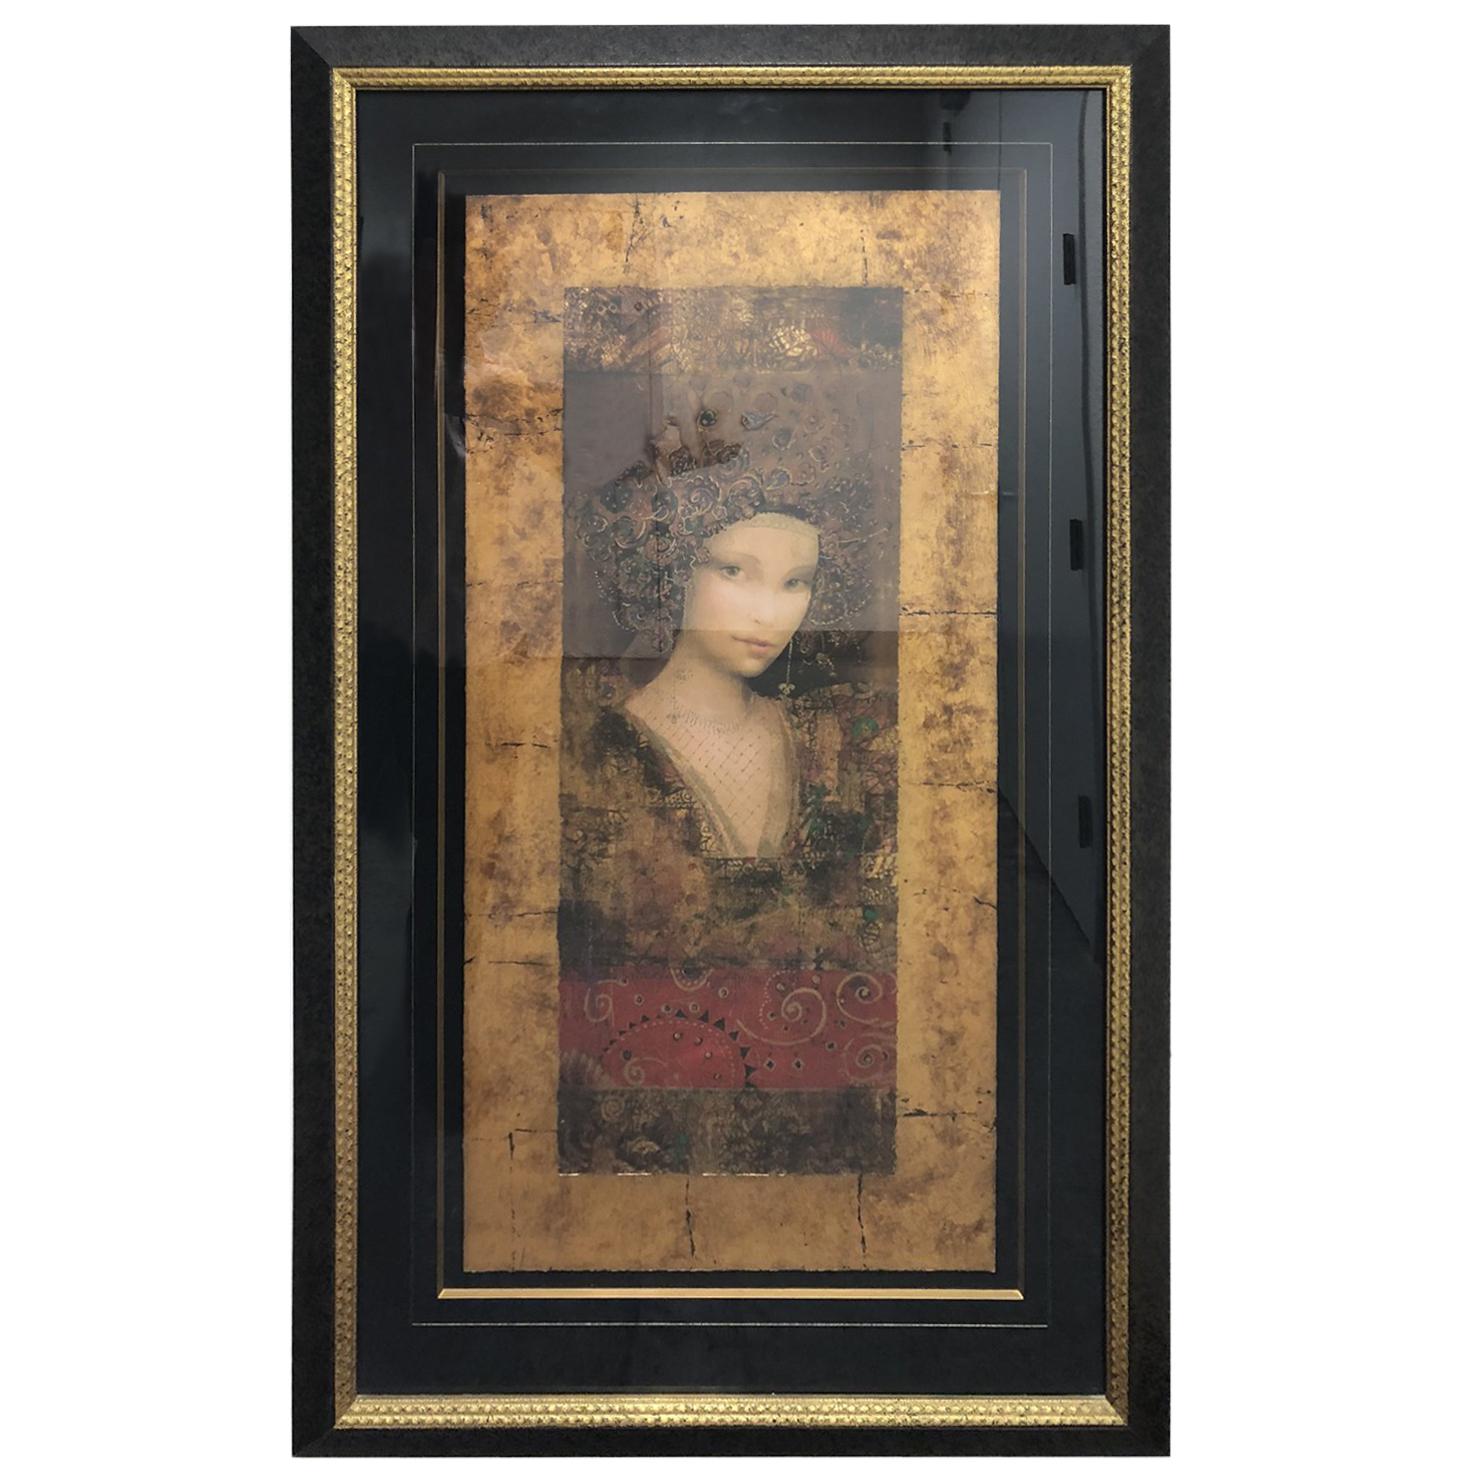 Csaba Markus Serigraph "Lucia" with Certificate For Sale